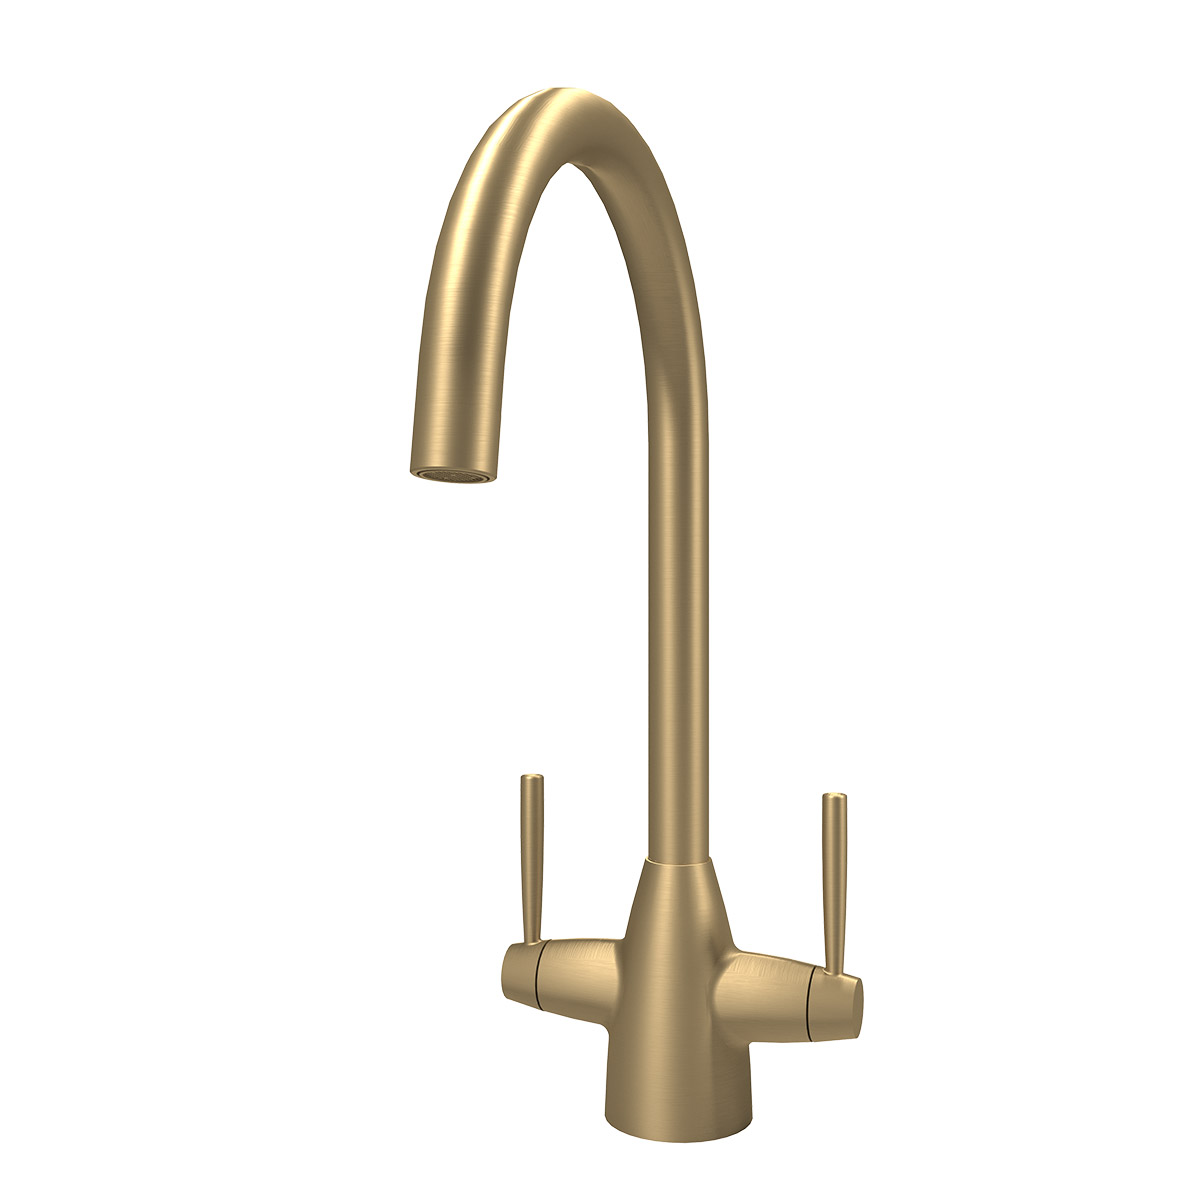 Ivy dual lever kitchen tap in brushed brass